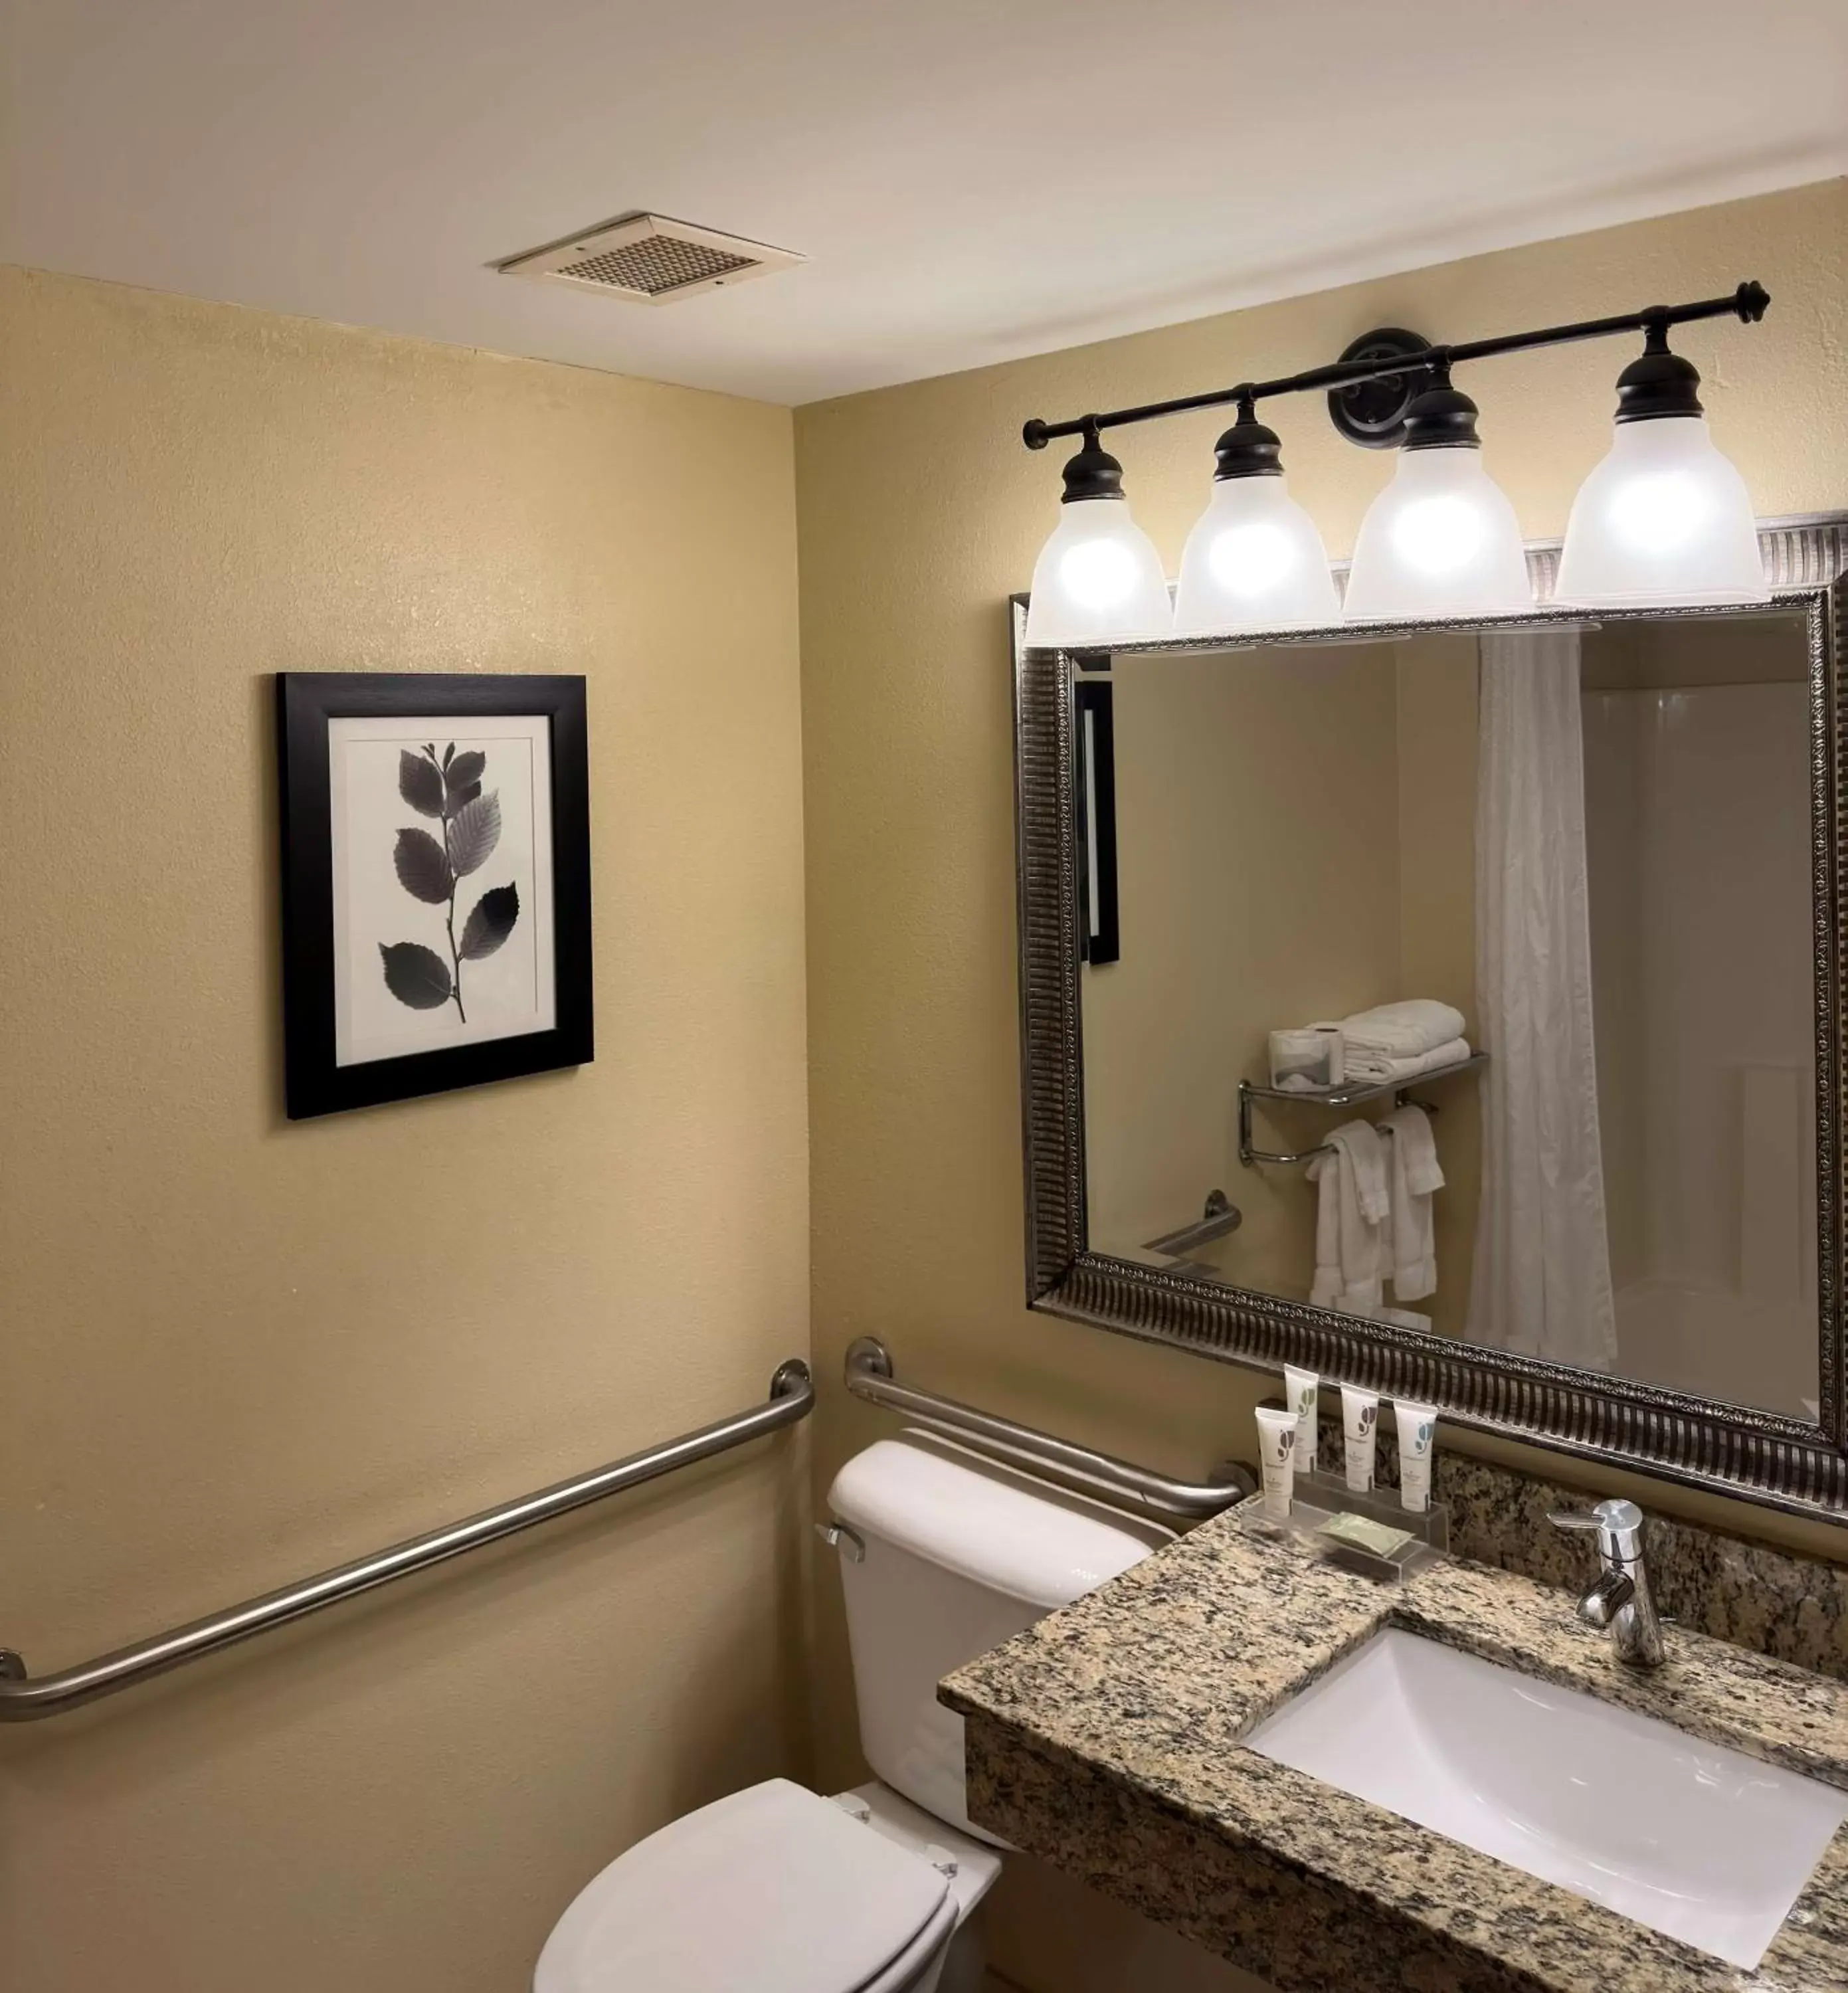 Bedroom, Bathroom in Country Inn & Suites by Radisson, Macedonia, OH